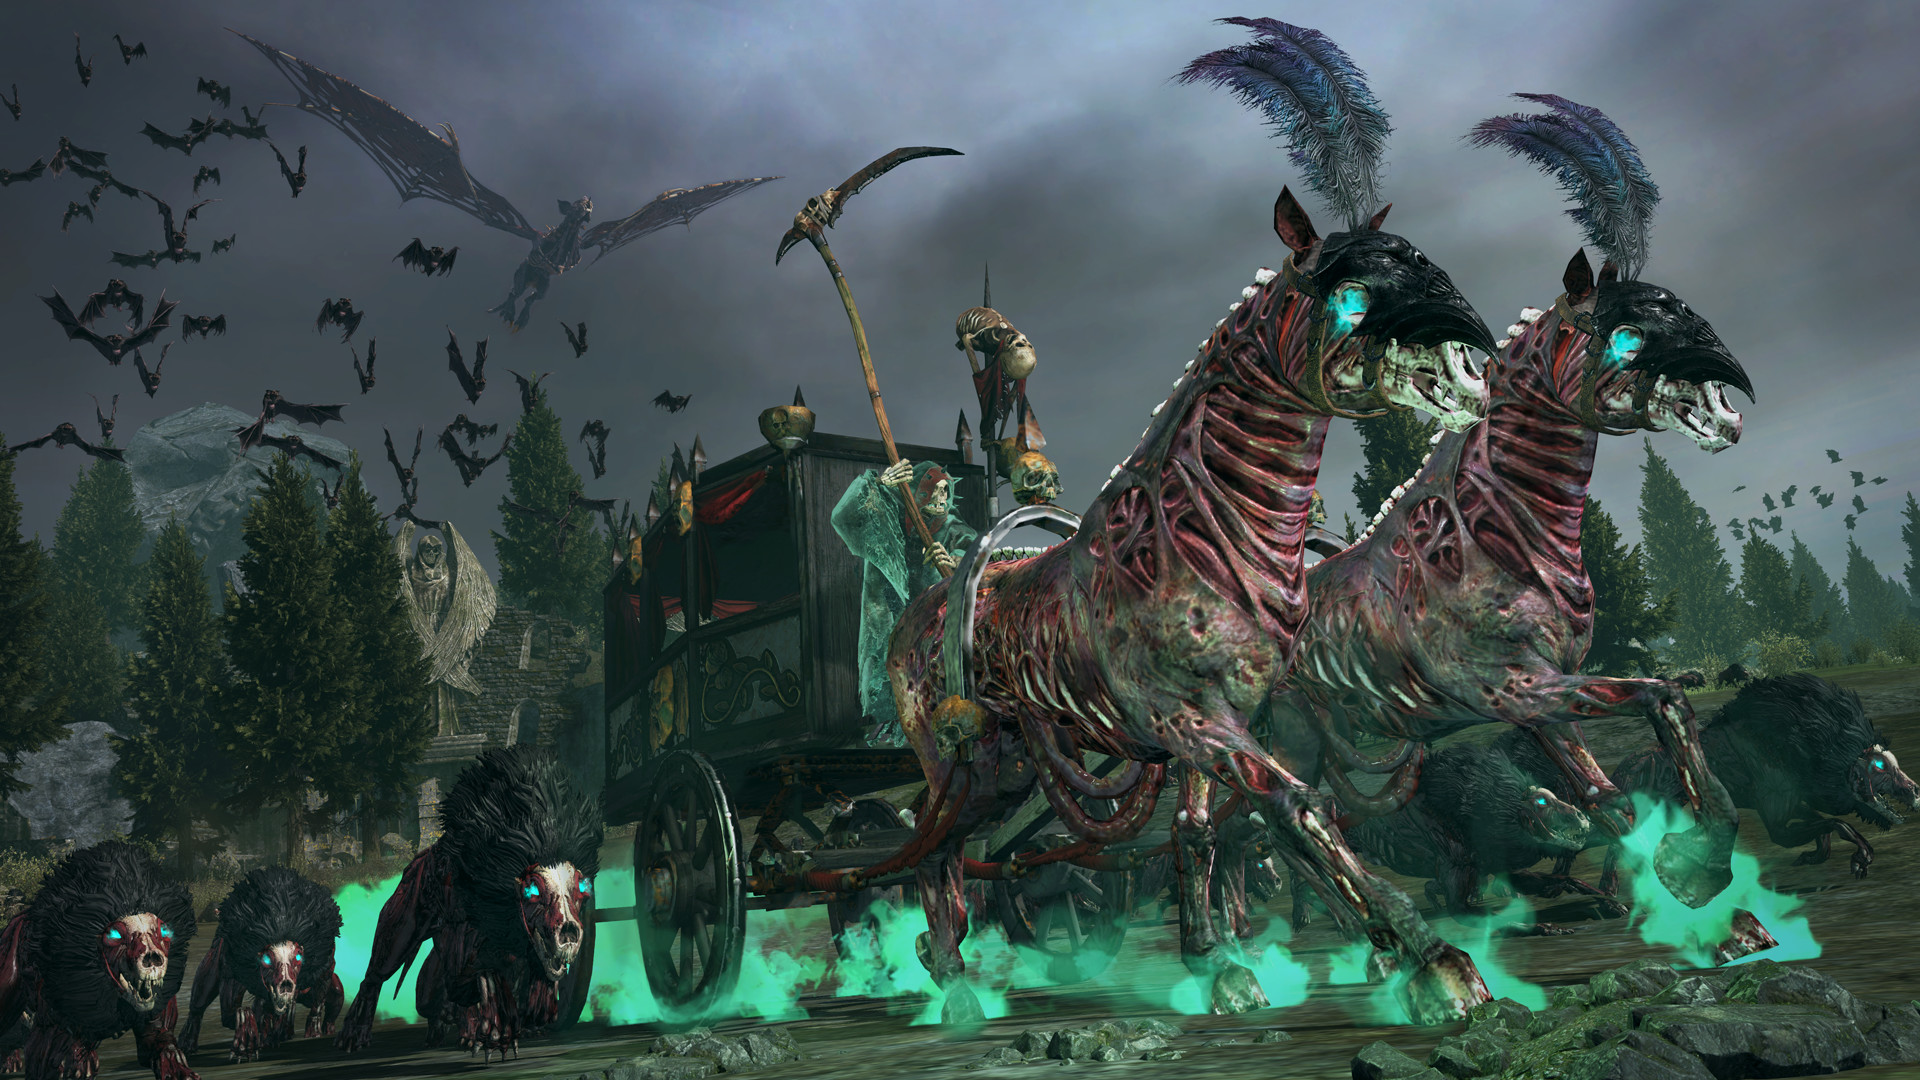 1920x1080 Nice Images Collection: Warhammer Desktop Wallpapers